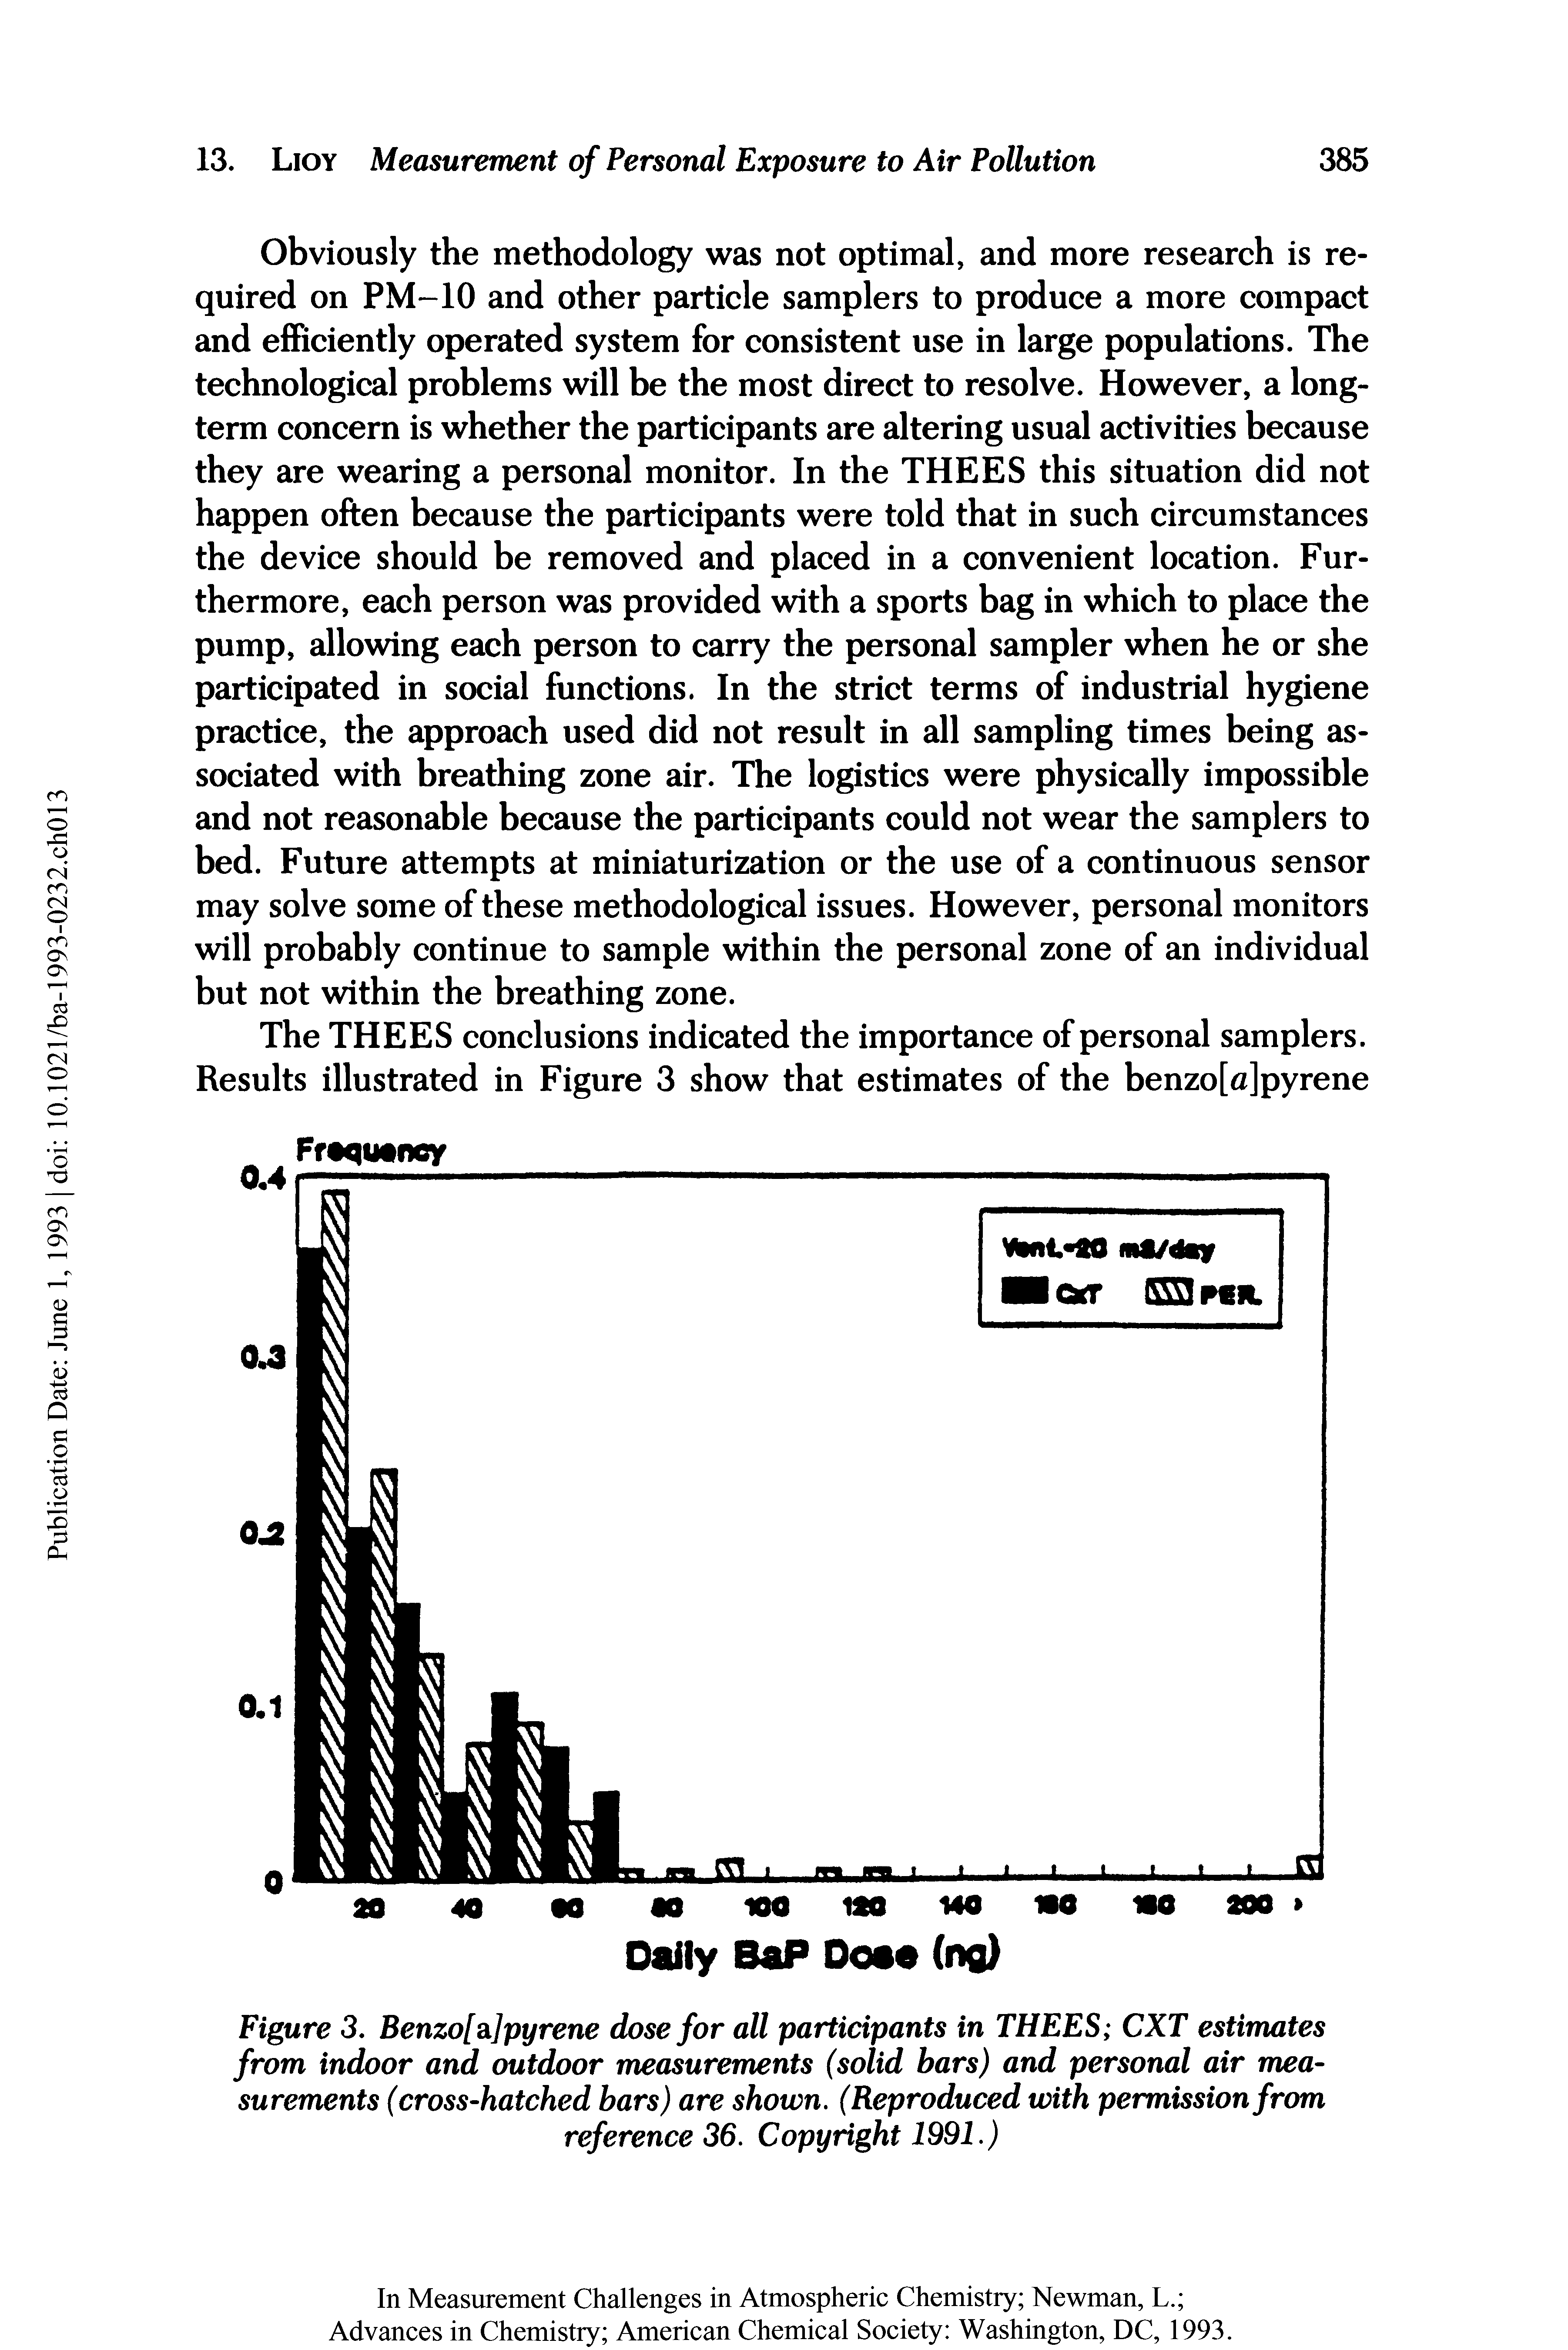 Figure 3. Benzo[ai]pyrene dose for all participants in THEES CXT estimates from indoor and outdoor measurements (solid bars) and personal air measurements (cross-hatched bars) are shown. (Reproduced with permission from reference 36. Copyright 1991.)...